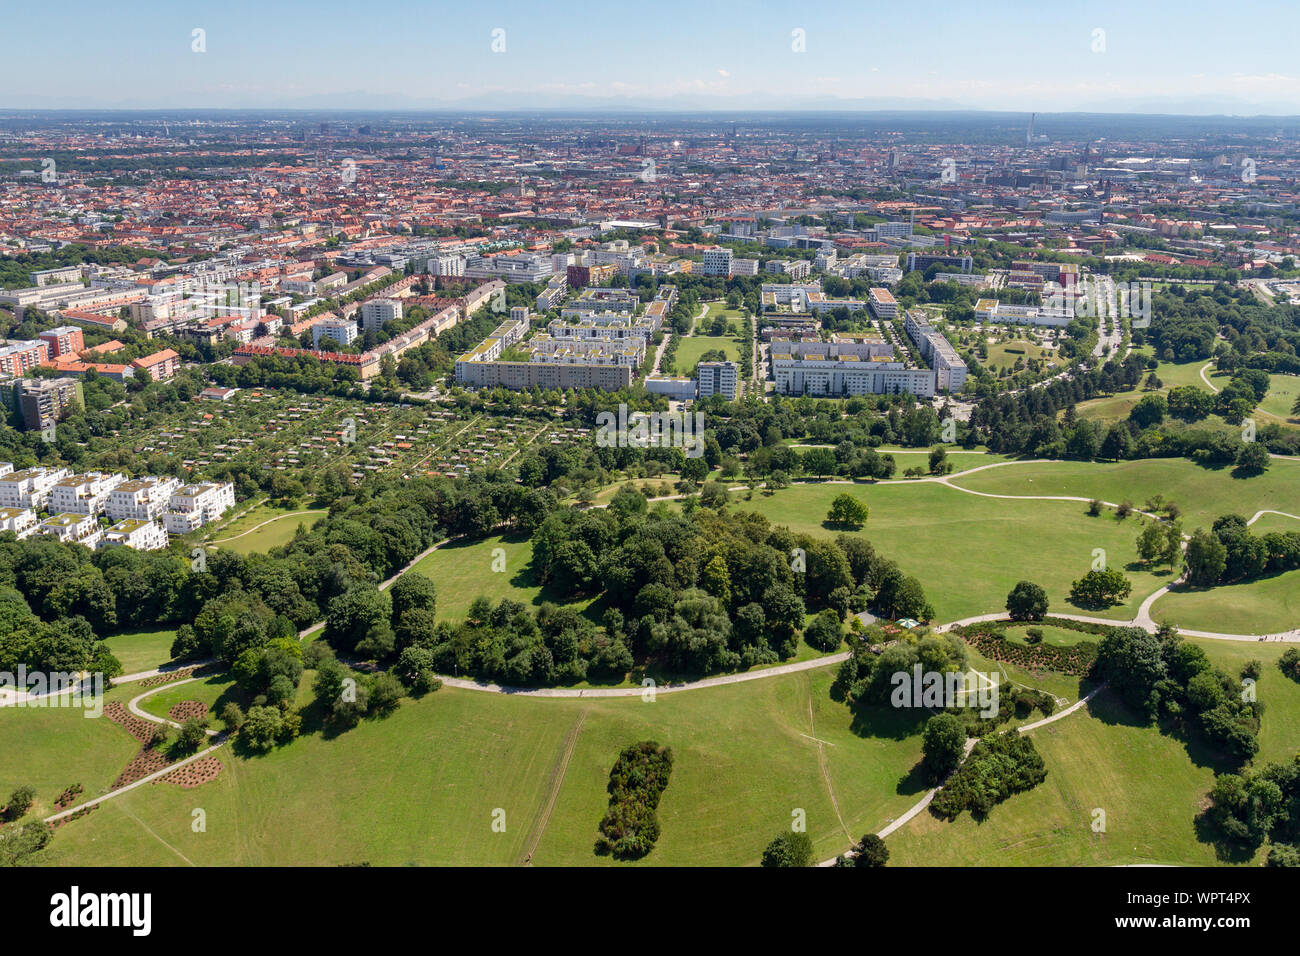 View of the housing and park area south of the Olympiaturm (Olympic Tower), Munich, Bavaria, Germany. Stock Photo